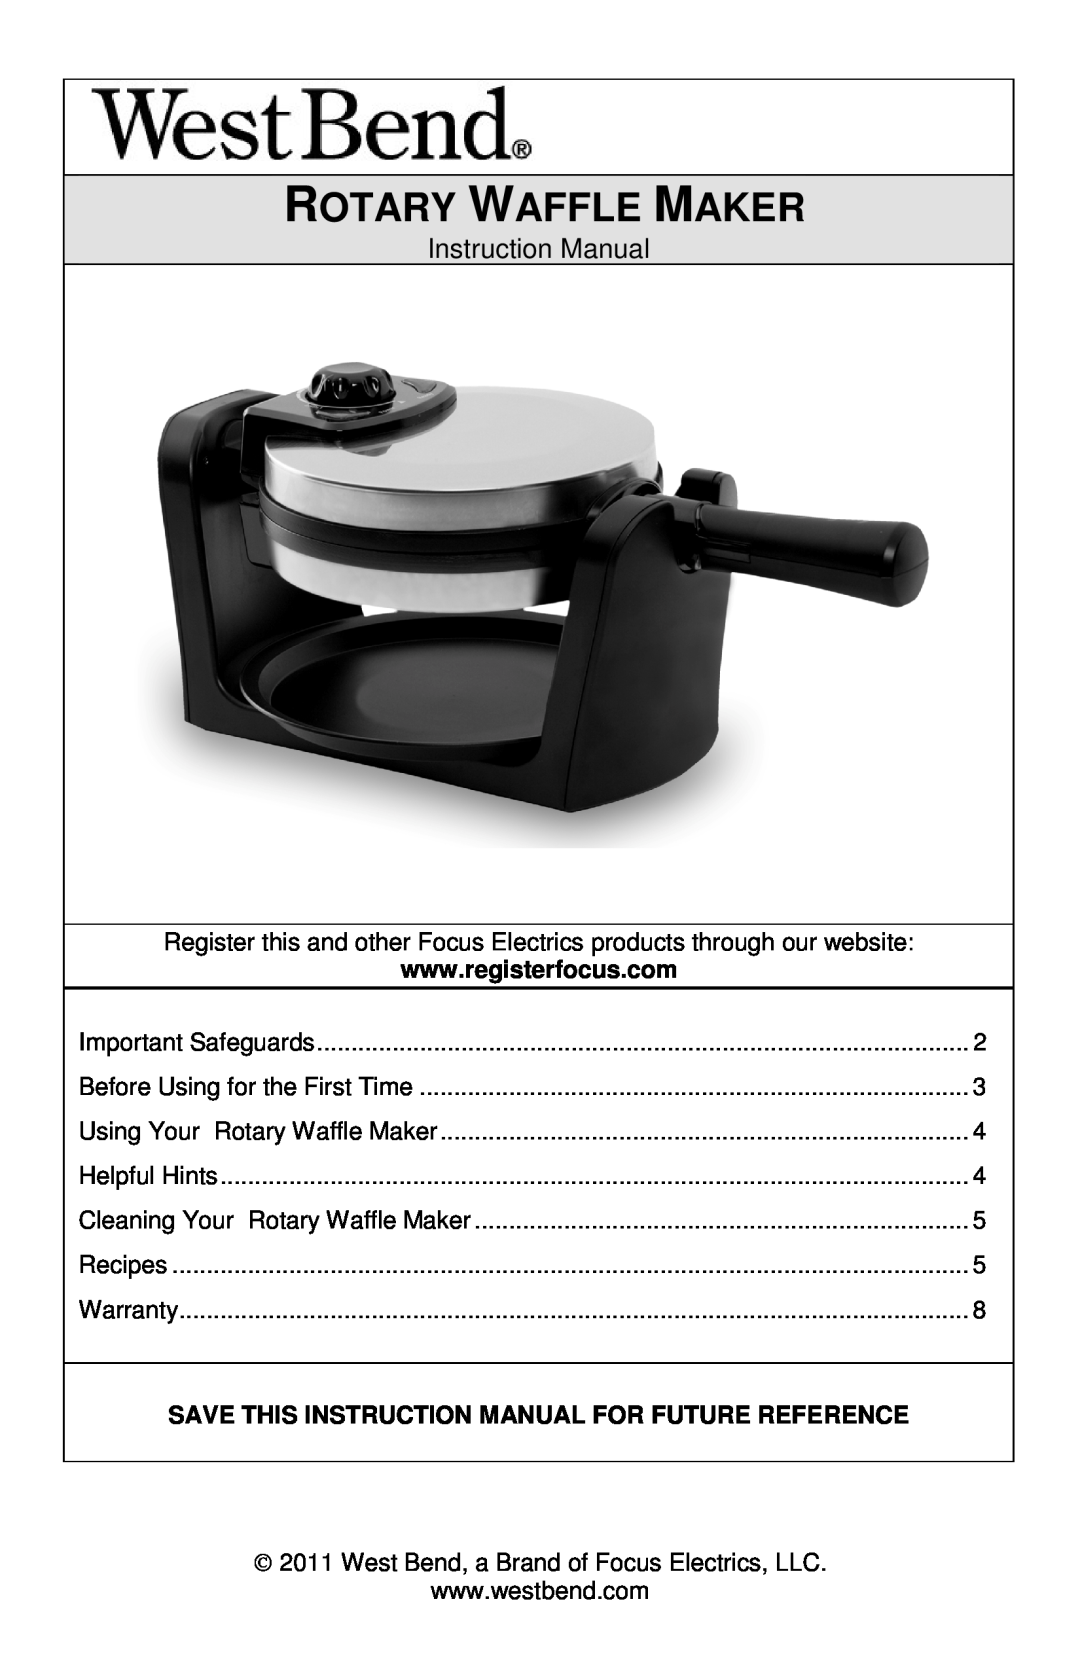 West Bend 6201 instruction manual Rotary Waffle Maker 